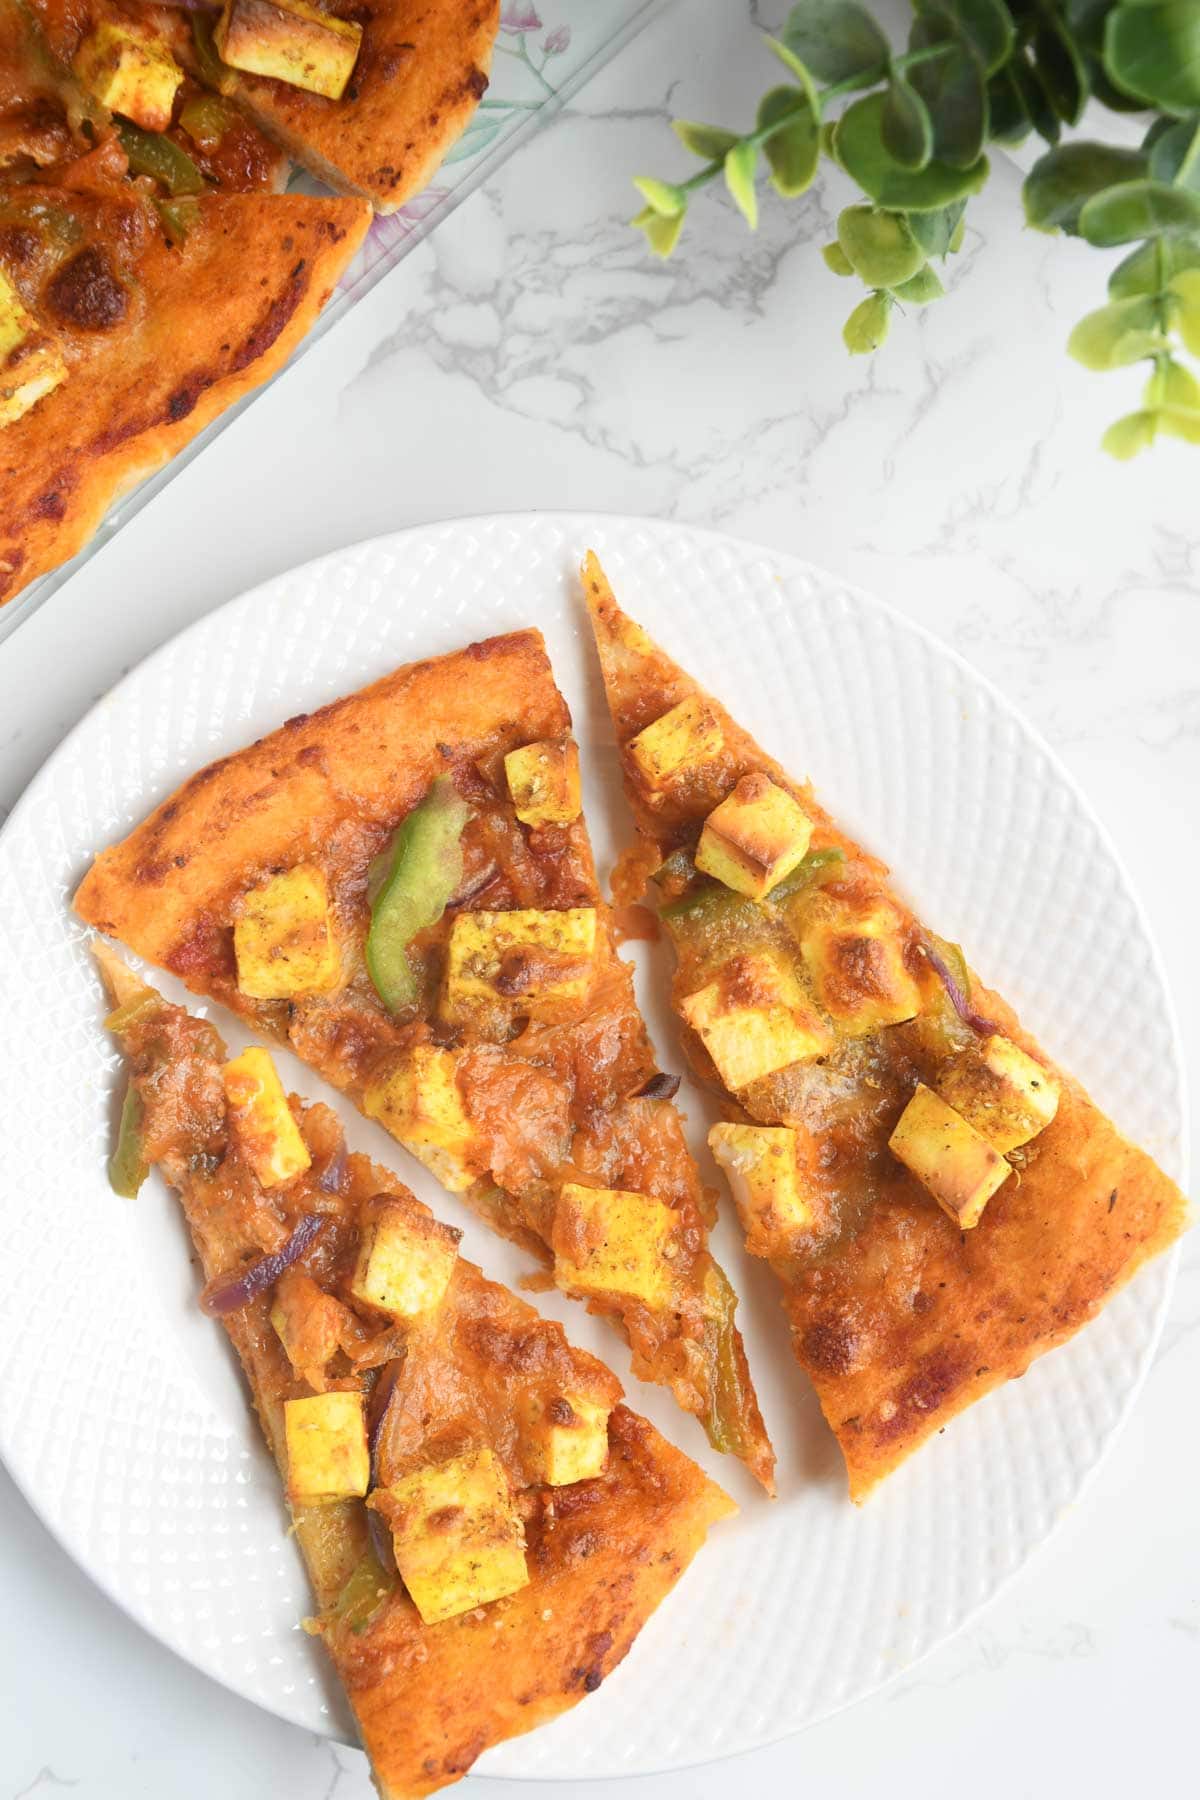 Paneer pizza slices in a plate.